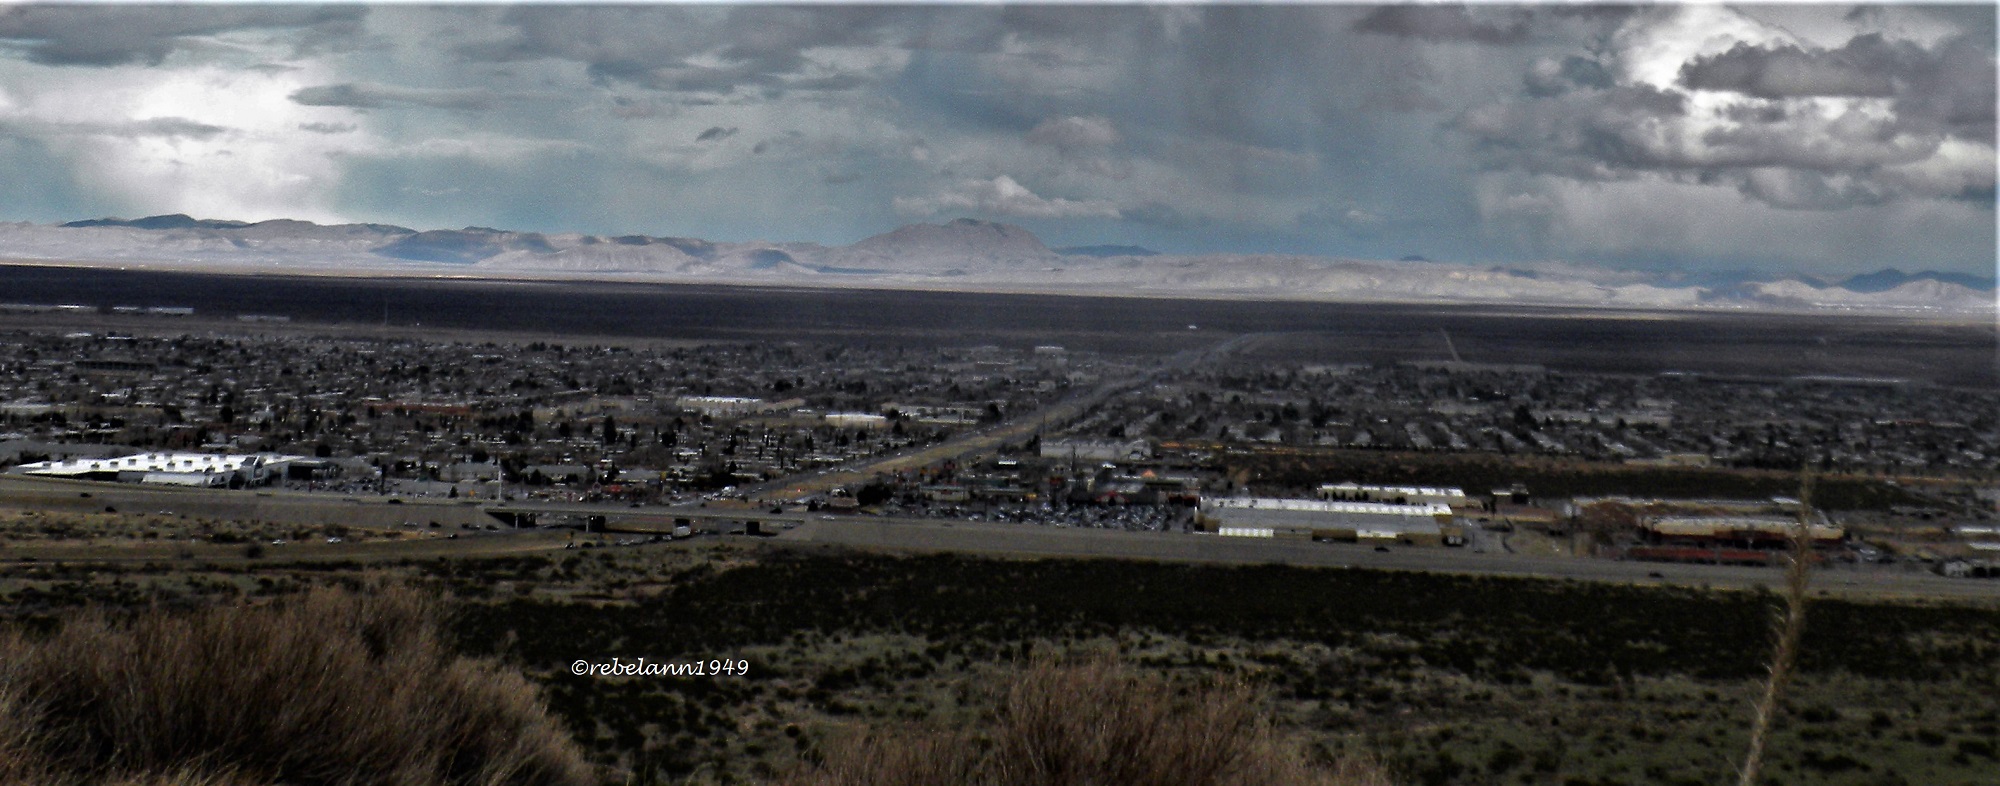 Old photo of northeast El Paso, I took this shot because the Guadalupes were so clear on that day.